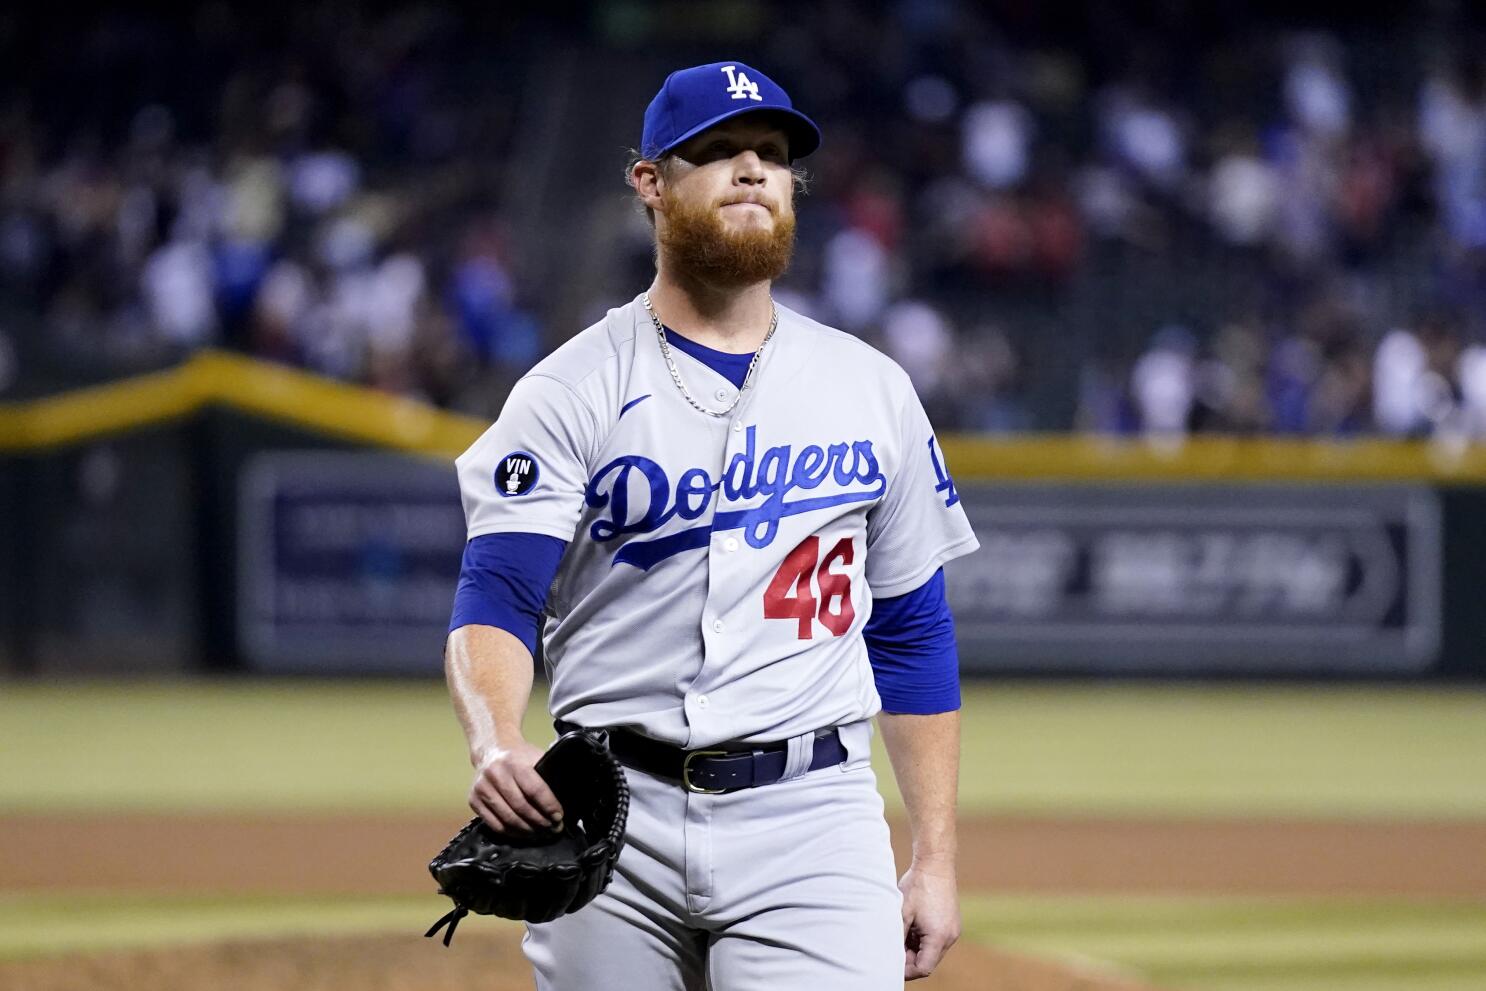 Craig Kimbrel struggles in Cubs' Game 2 loss to Reds